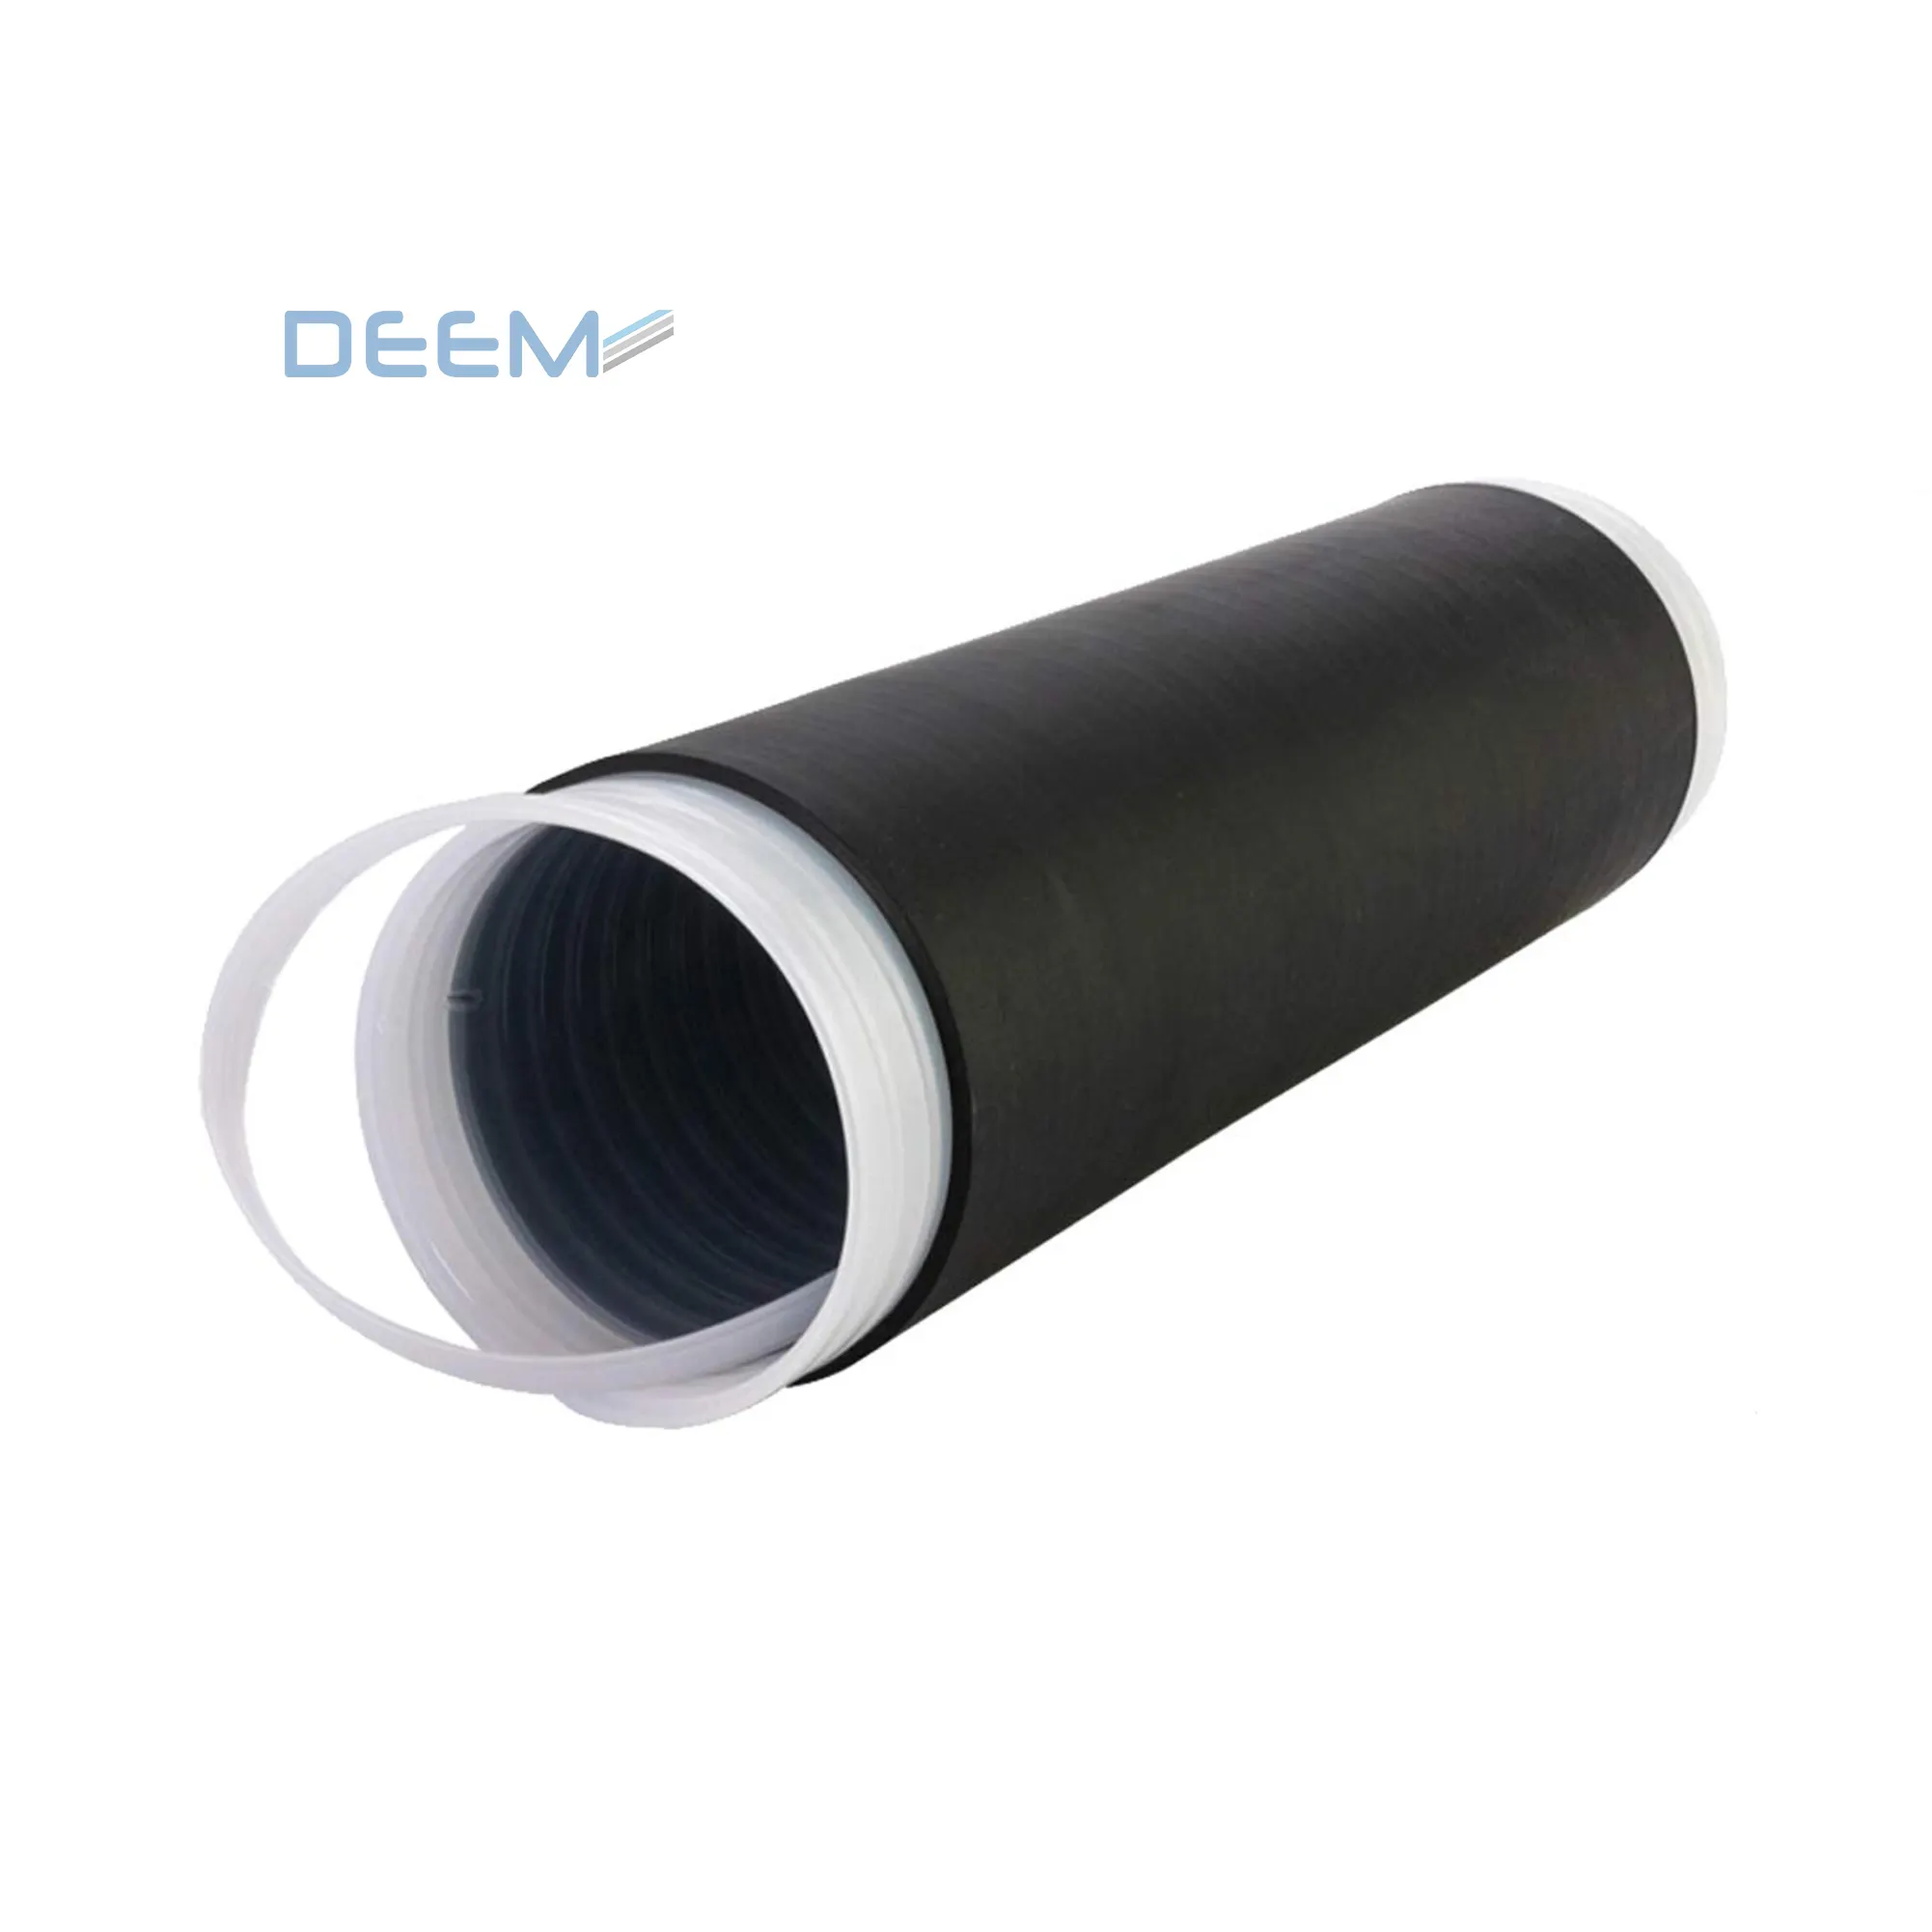 DEEM Black color flexible cold shrinkable sleeving cold shrink tube for cable insulation and protection